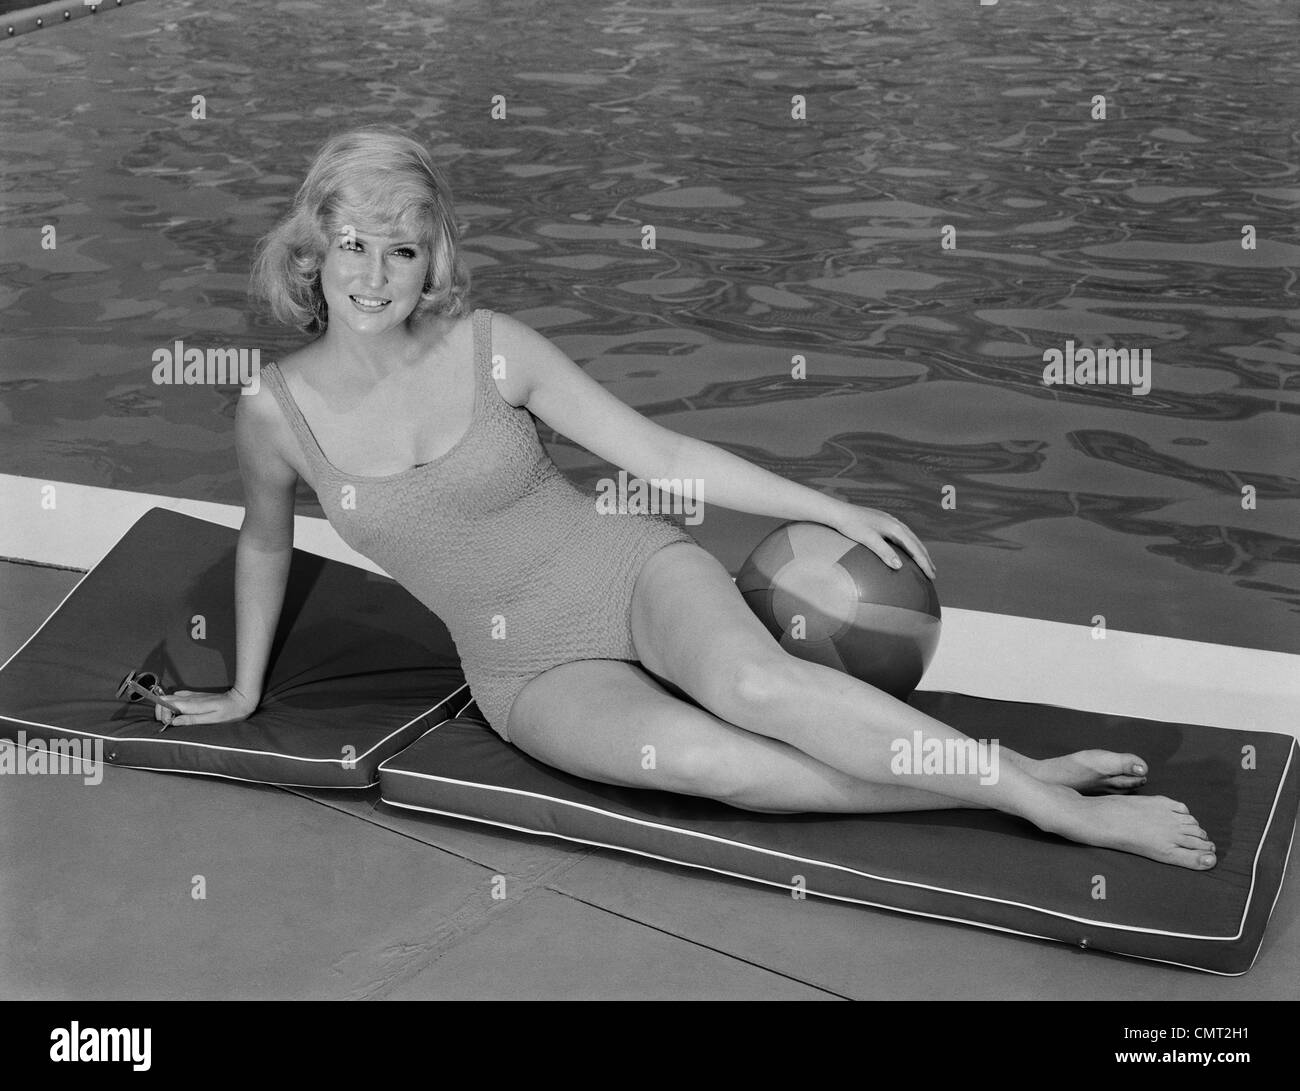 1960s SMILING BLOND WOMAN WEARING SWIMSUIT BY POOL POSING HAND ON BEACH BALL Stock Photo